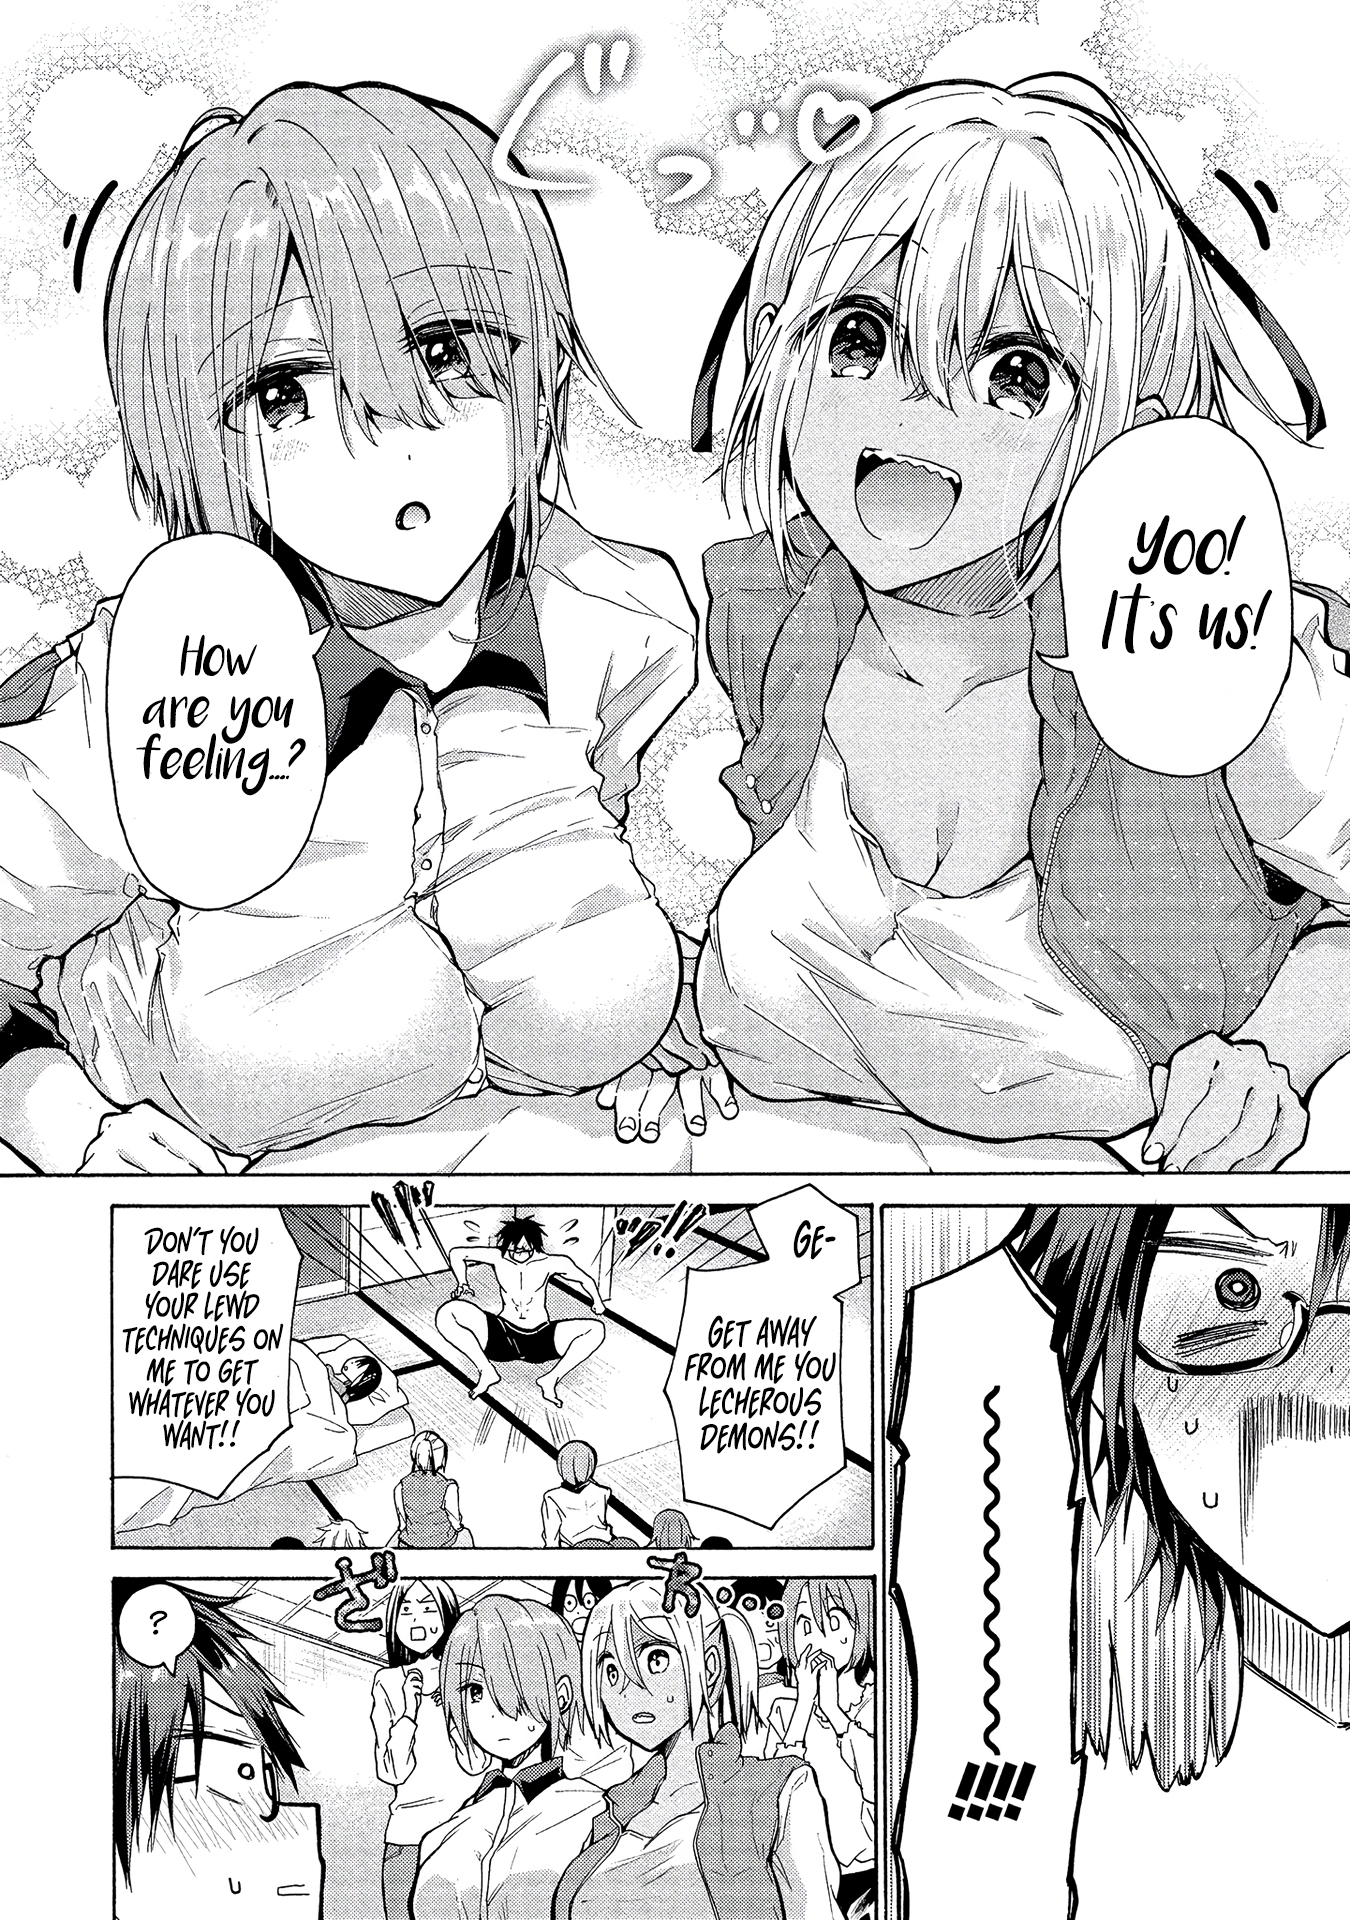 The Three Sisters Are Trying To Seduce Me!! vol.1 ch.2